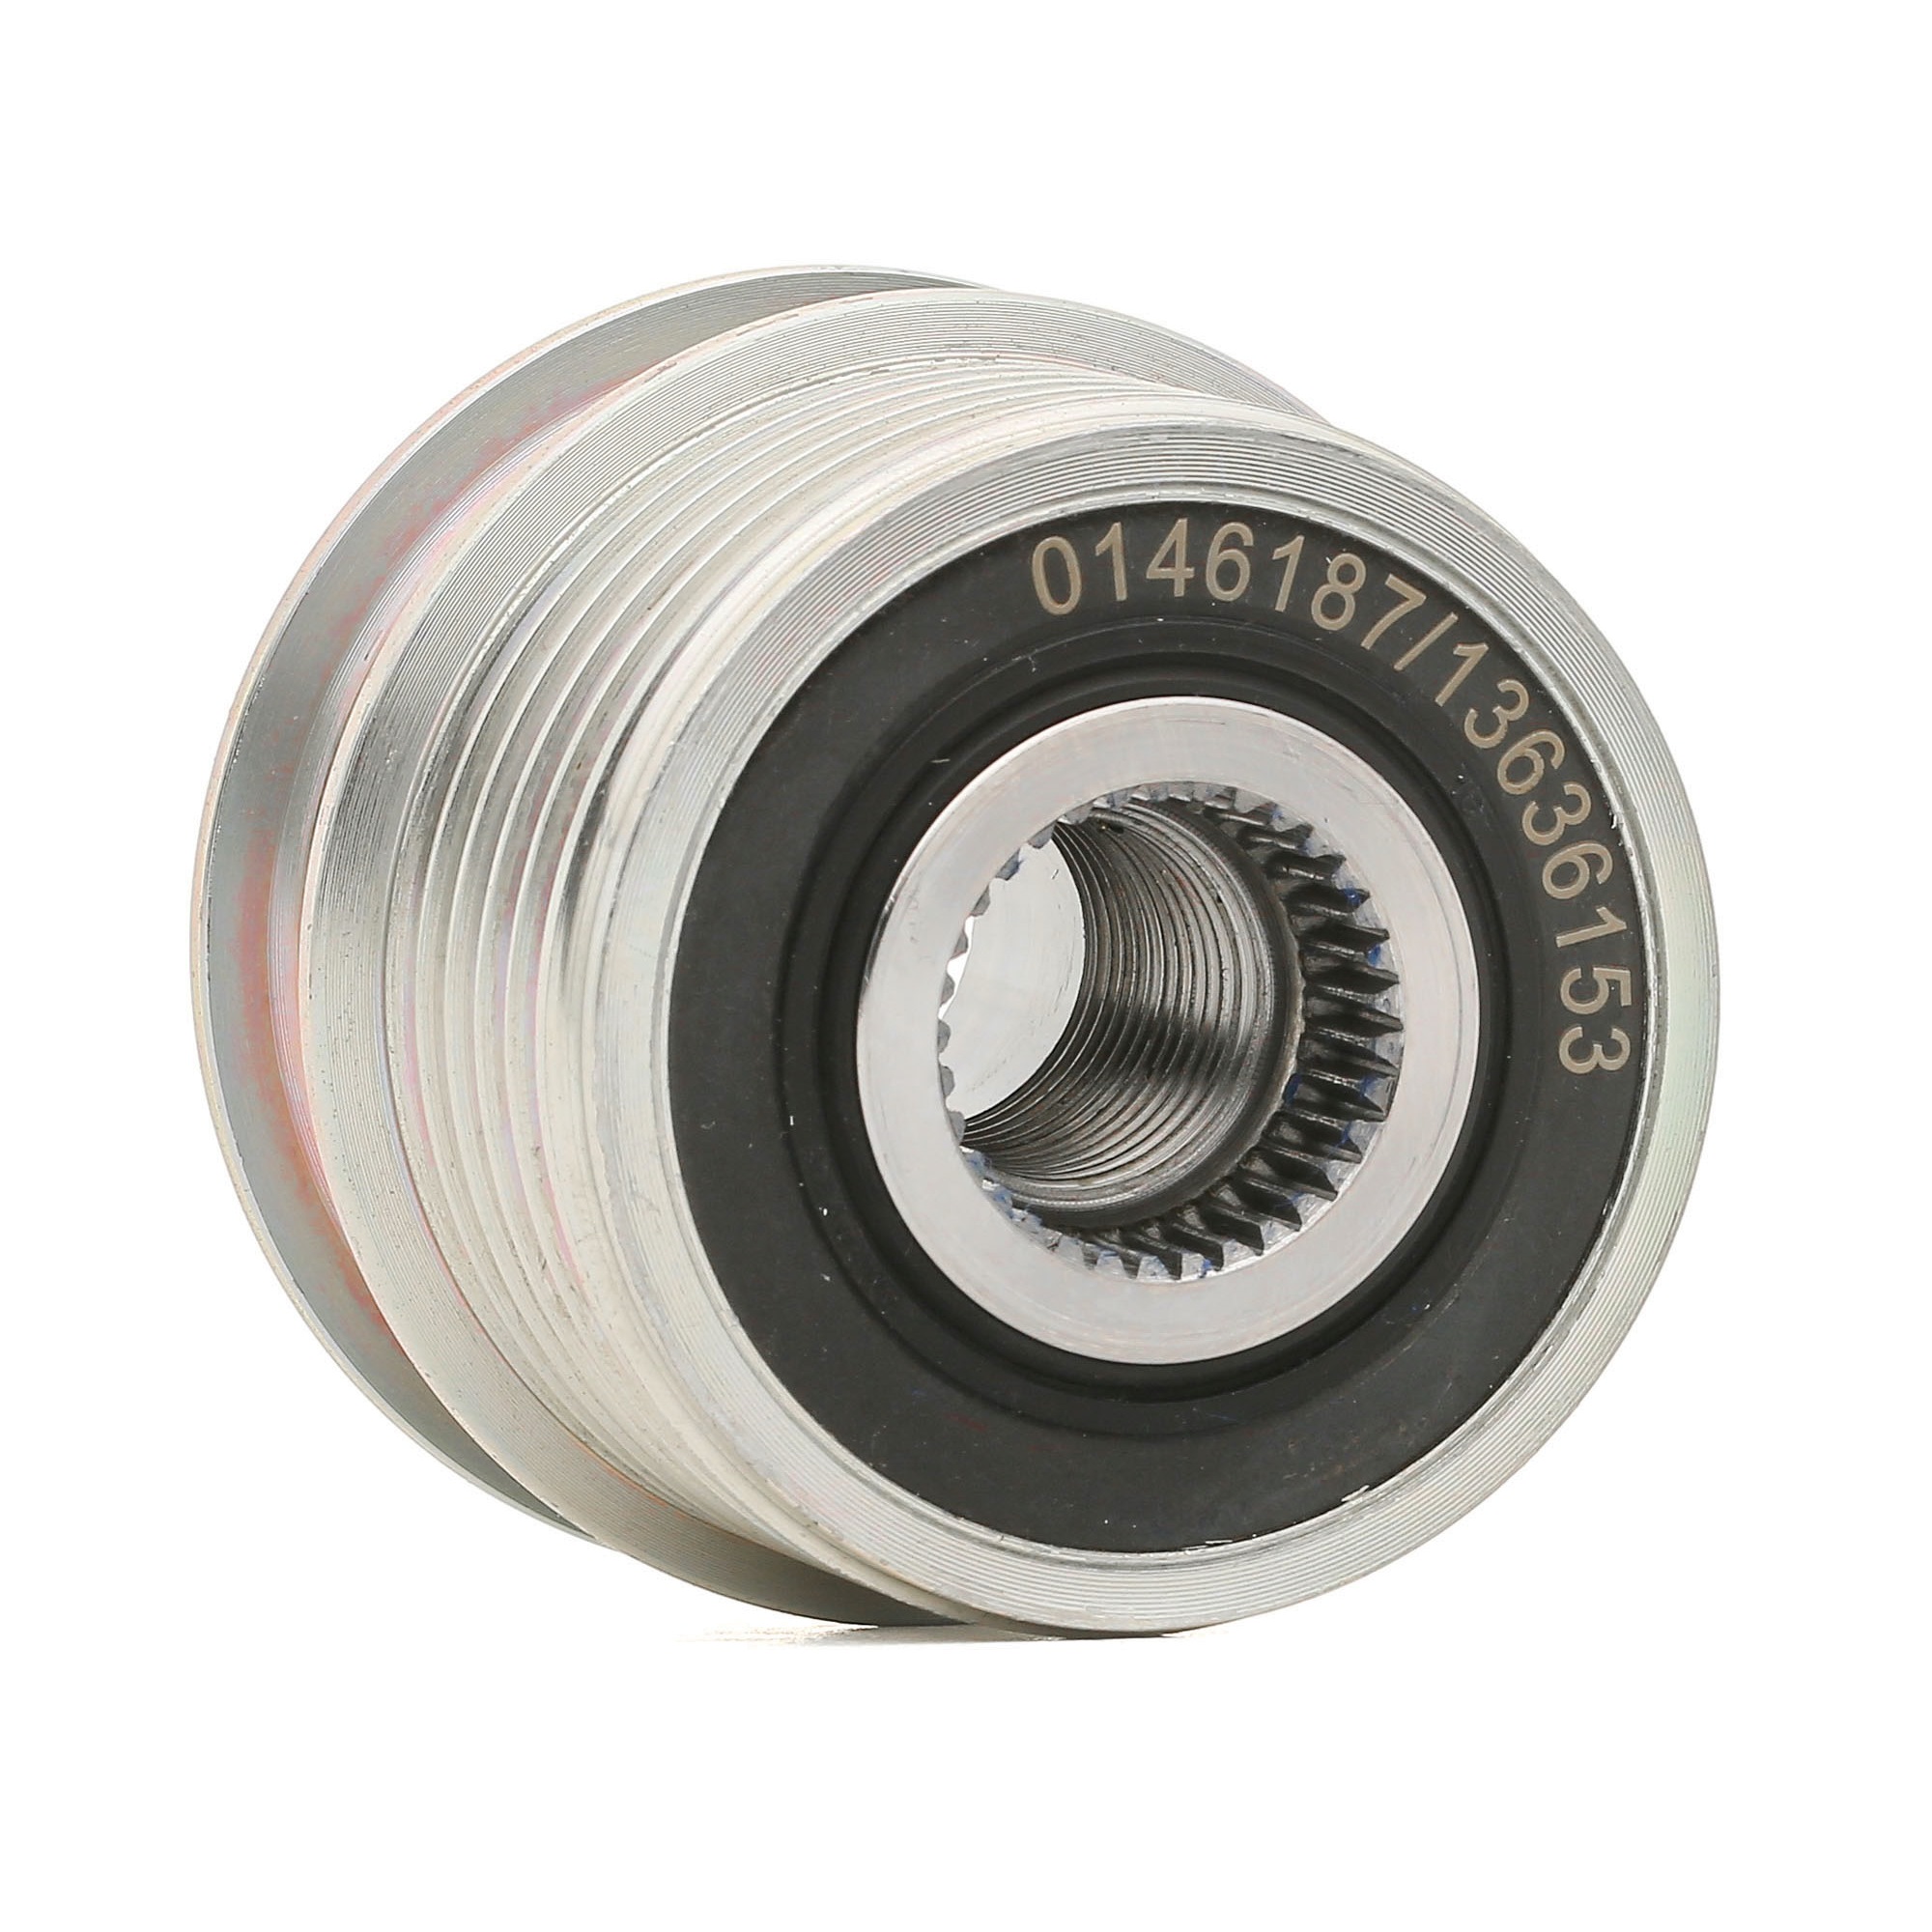 STARK SKFC-1210073 Alternator Freewheel Clutch Width: 44,6mm, Requires special tools for mounting